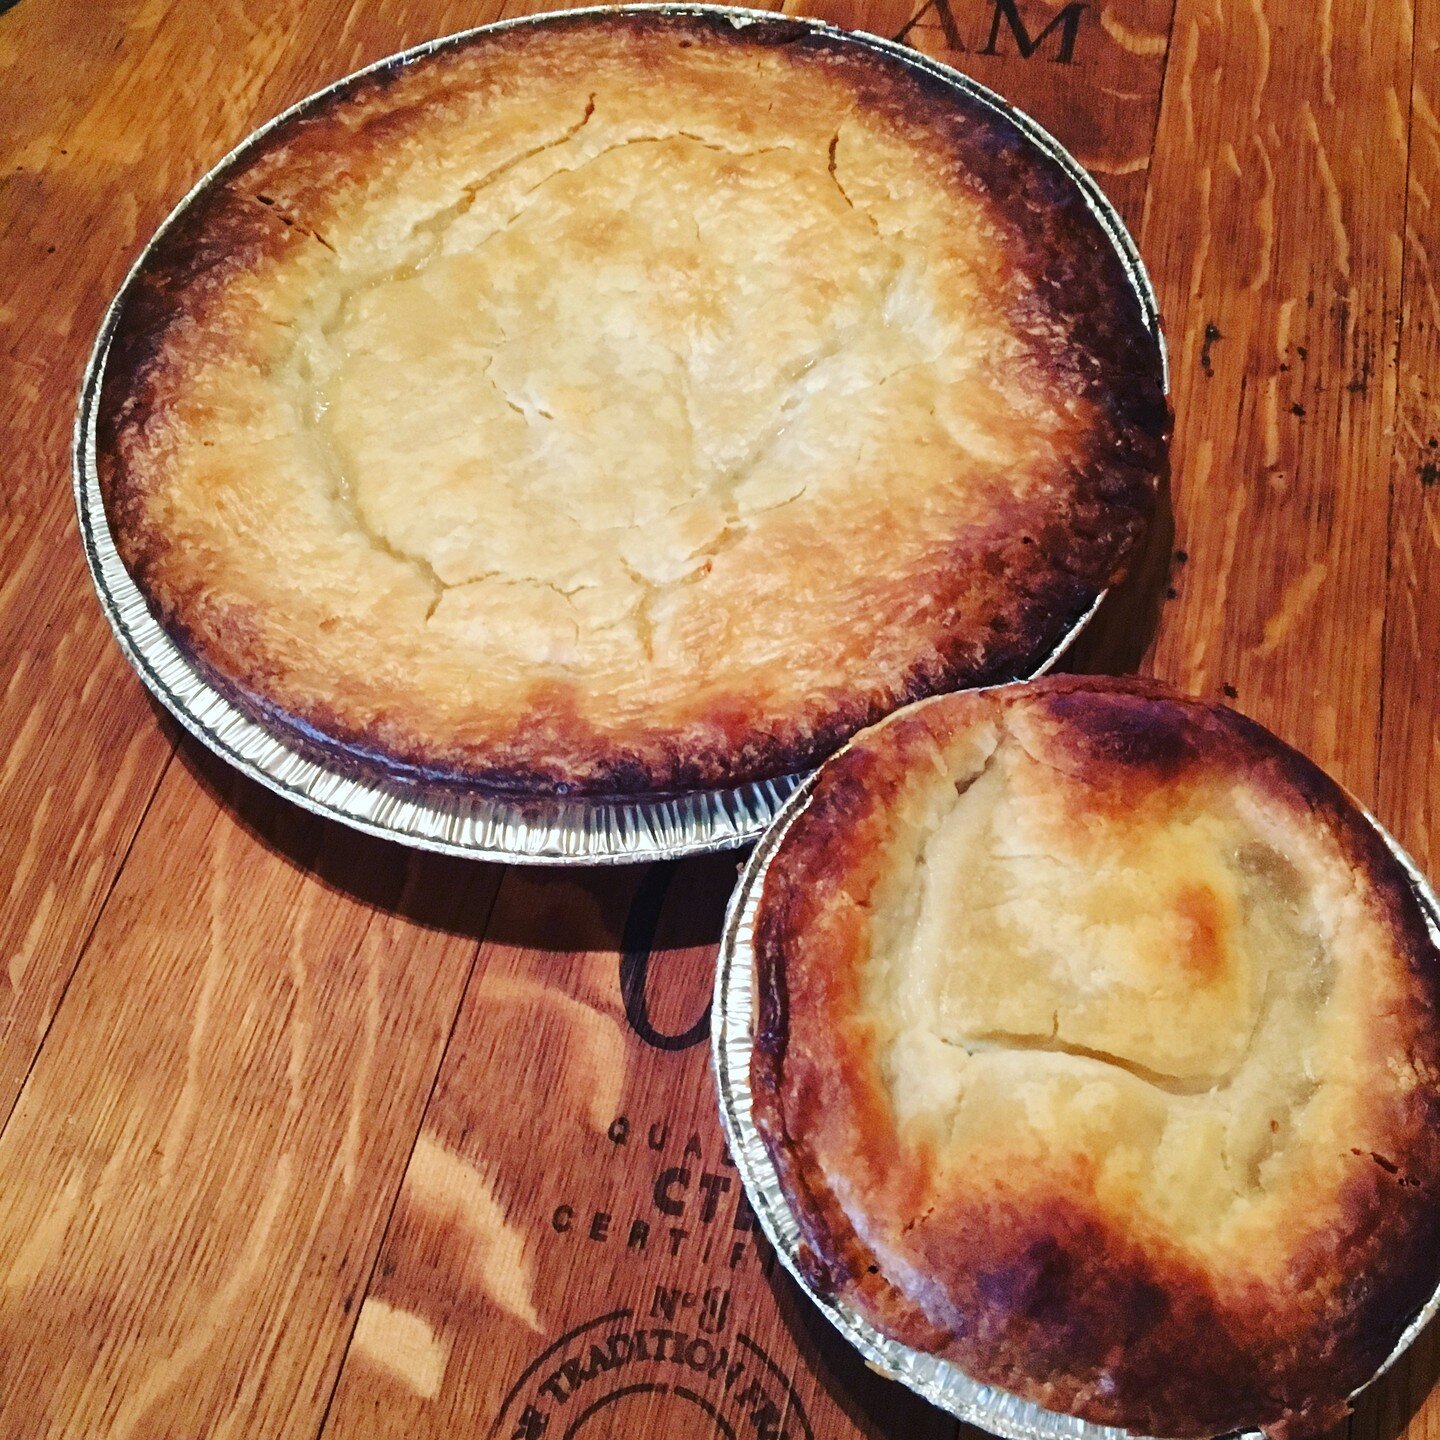 Why not let us make your Thanksgiving a bit easier this year by supplying you with our Moravian Chicken Pie and Chicken Pot pie. You can take them straight from the freezer the oven for just a little over an hour. For optimum yumminess, allow your Ch